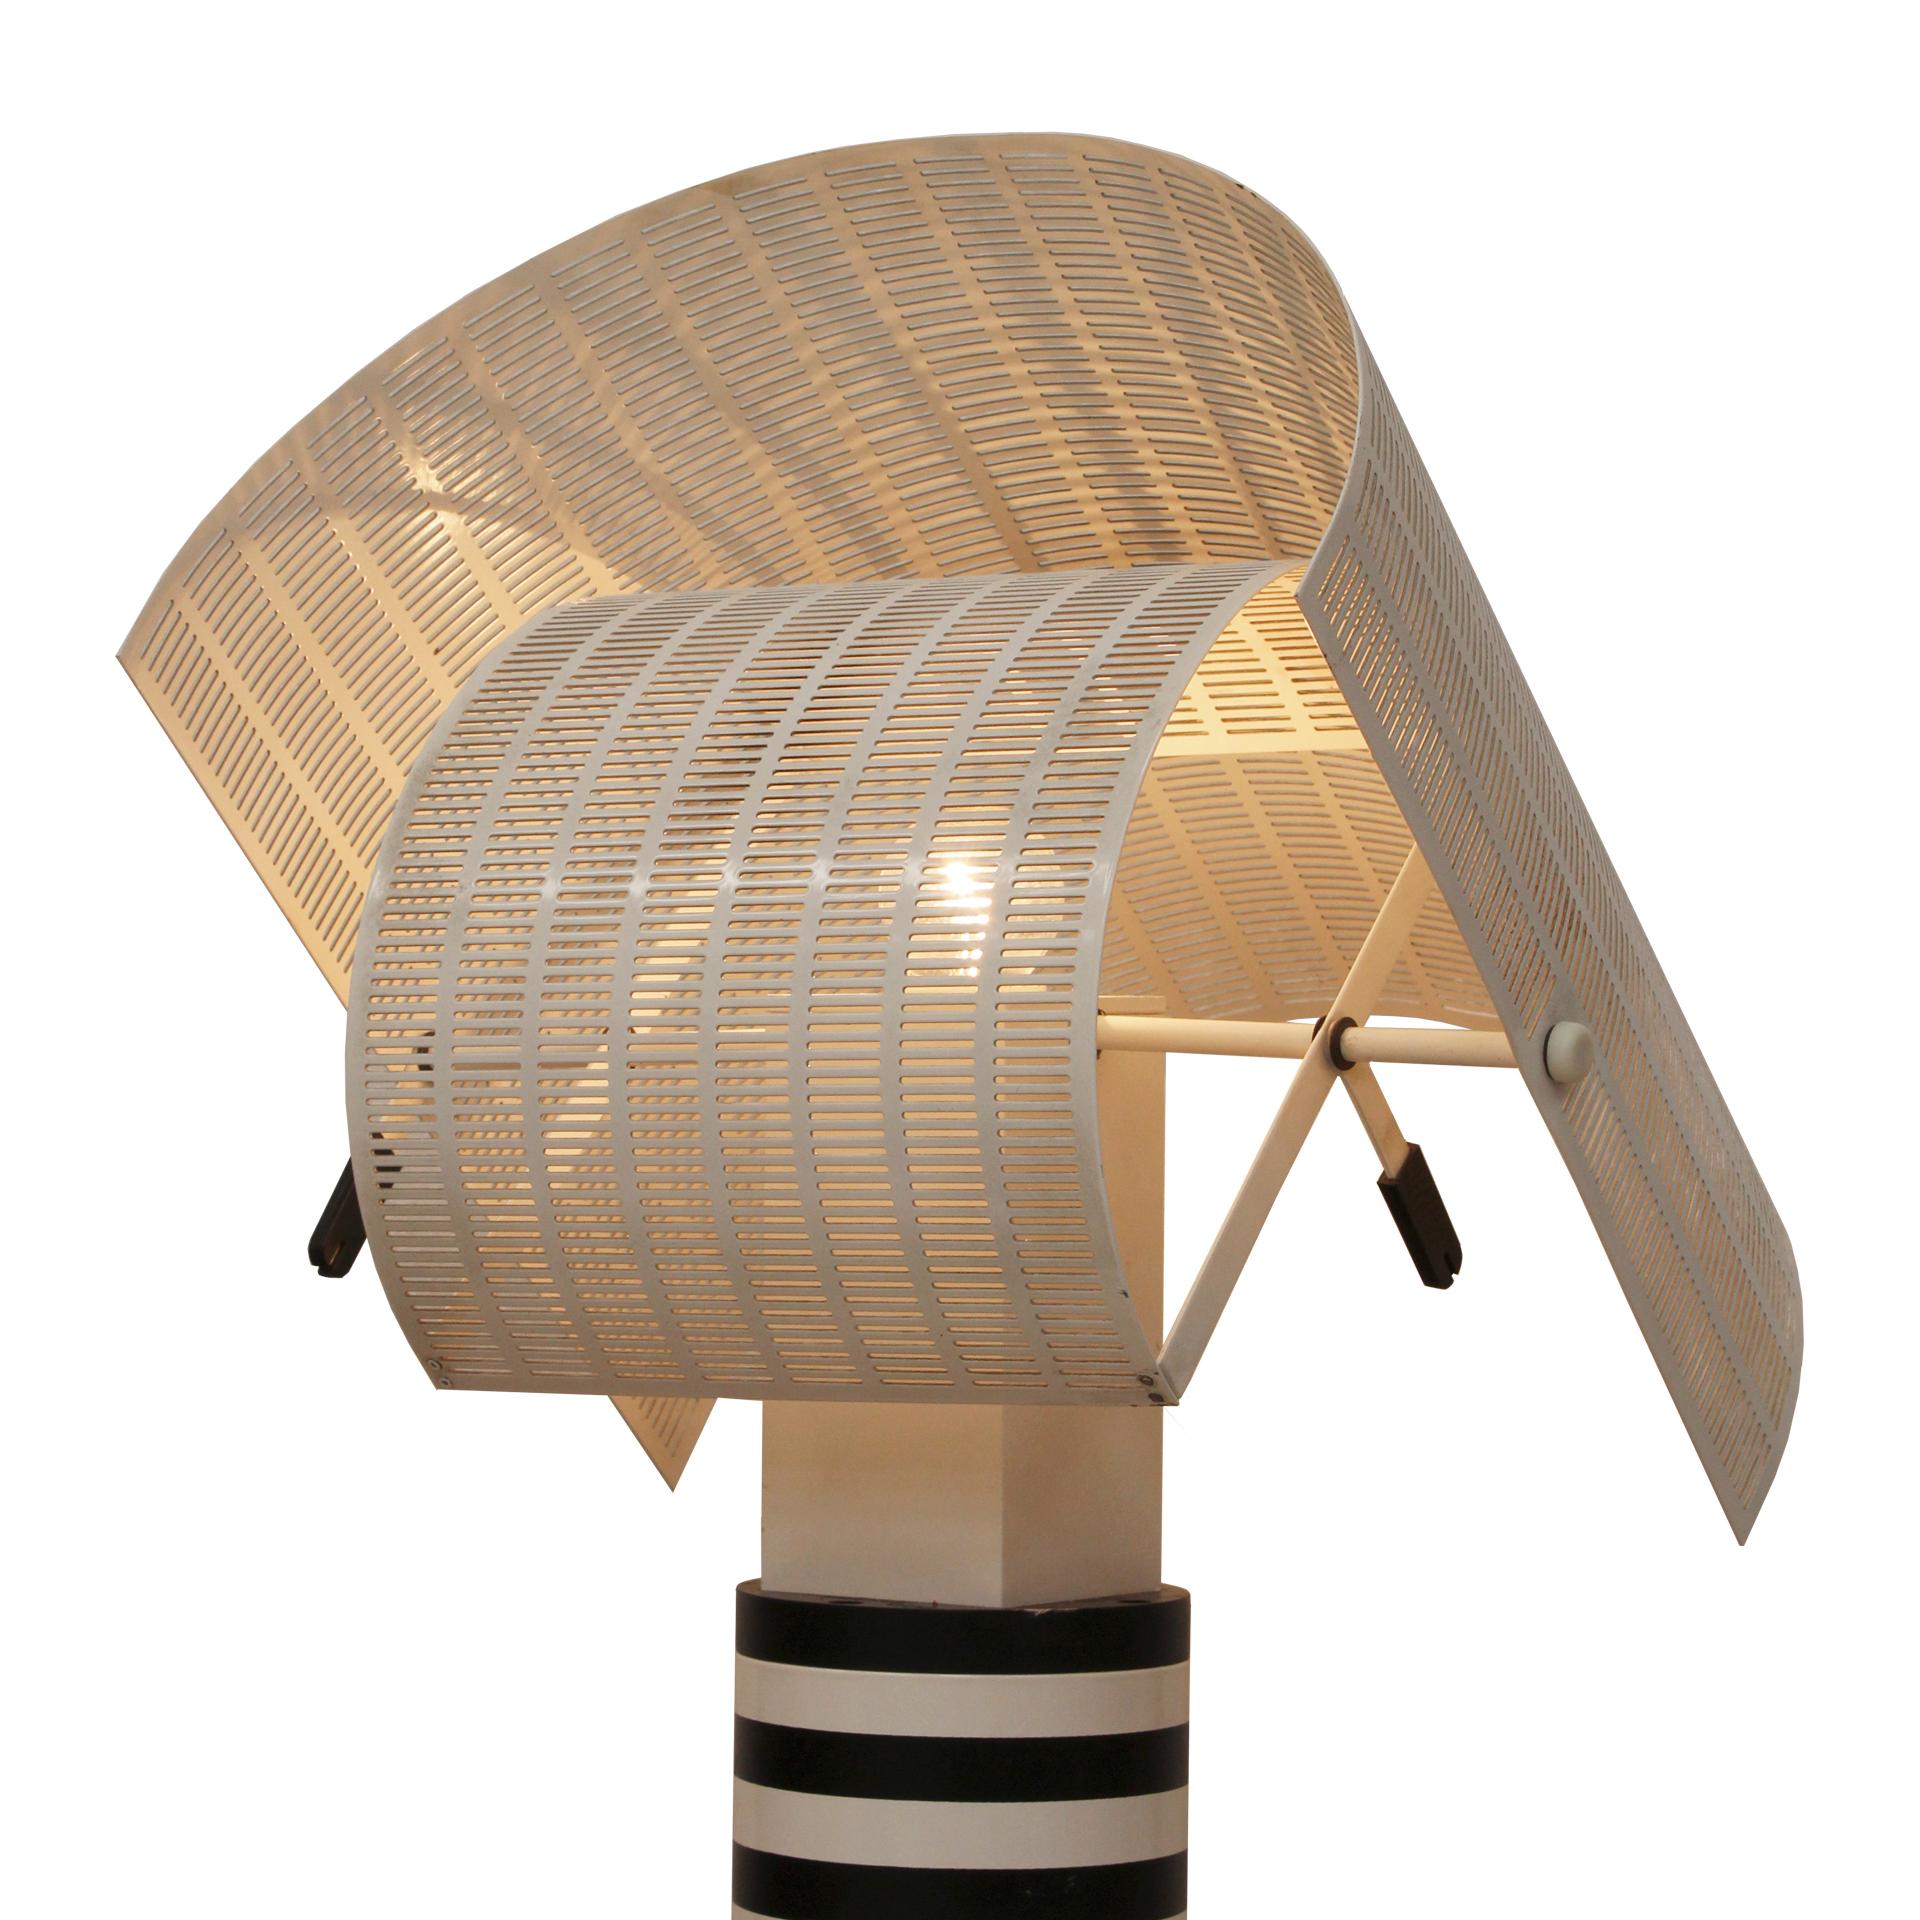 Mid-Century Modern Mod. Shogun Table Lamp Designed by Mario Botta for Artemide In Good Condition For Sale In Madrid, ES